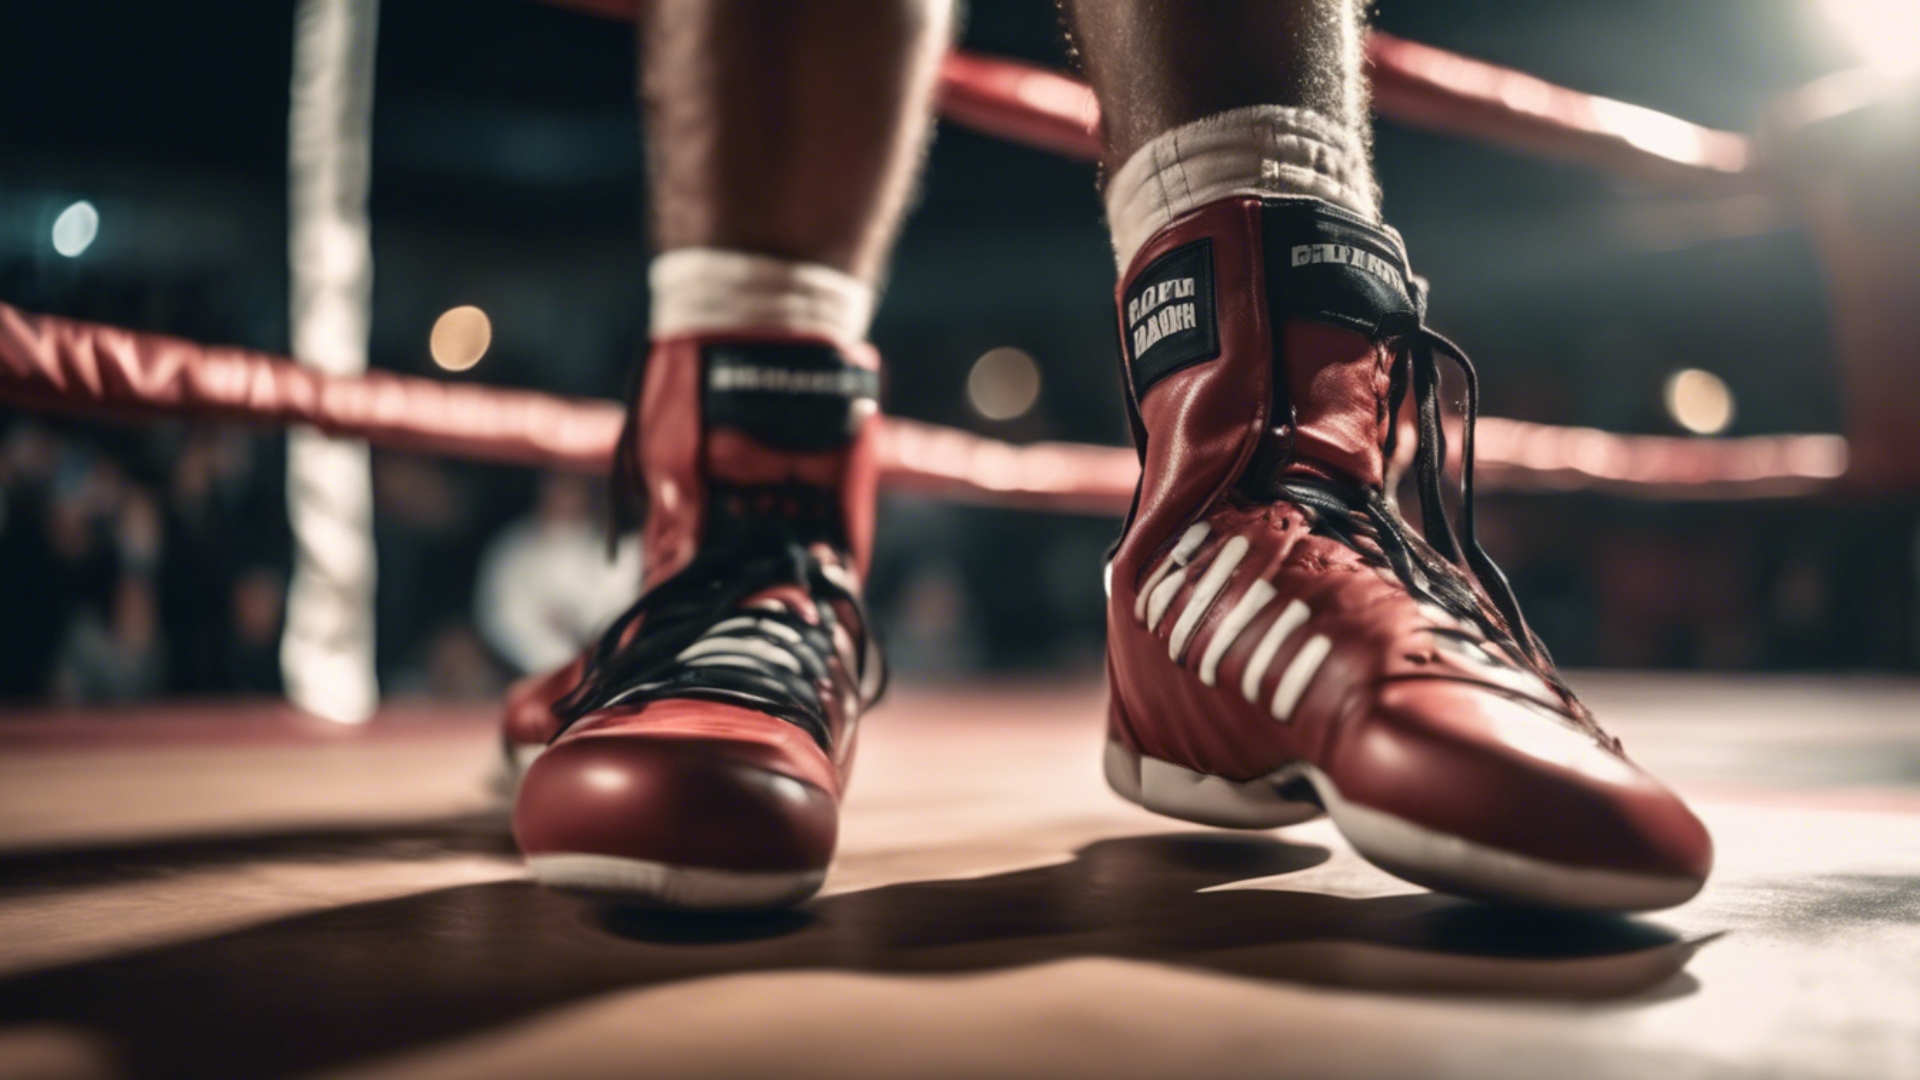 Boxer Wear Basketball Shoes While Boxing in the Ring